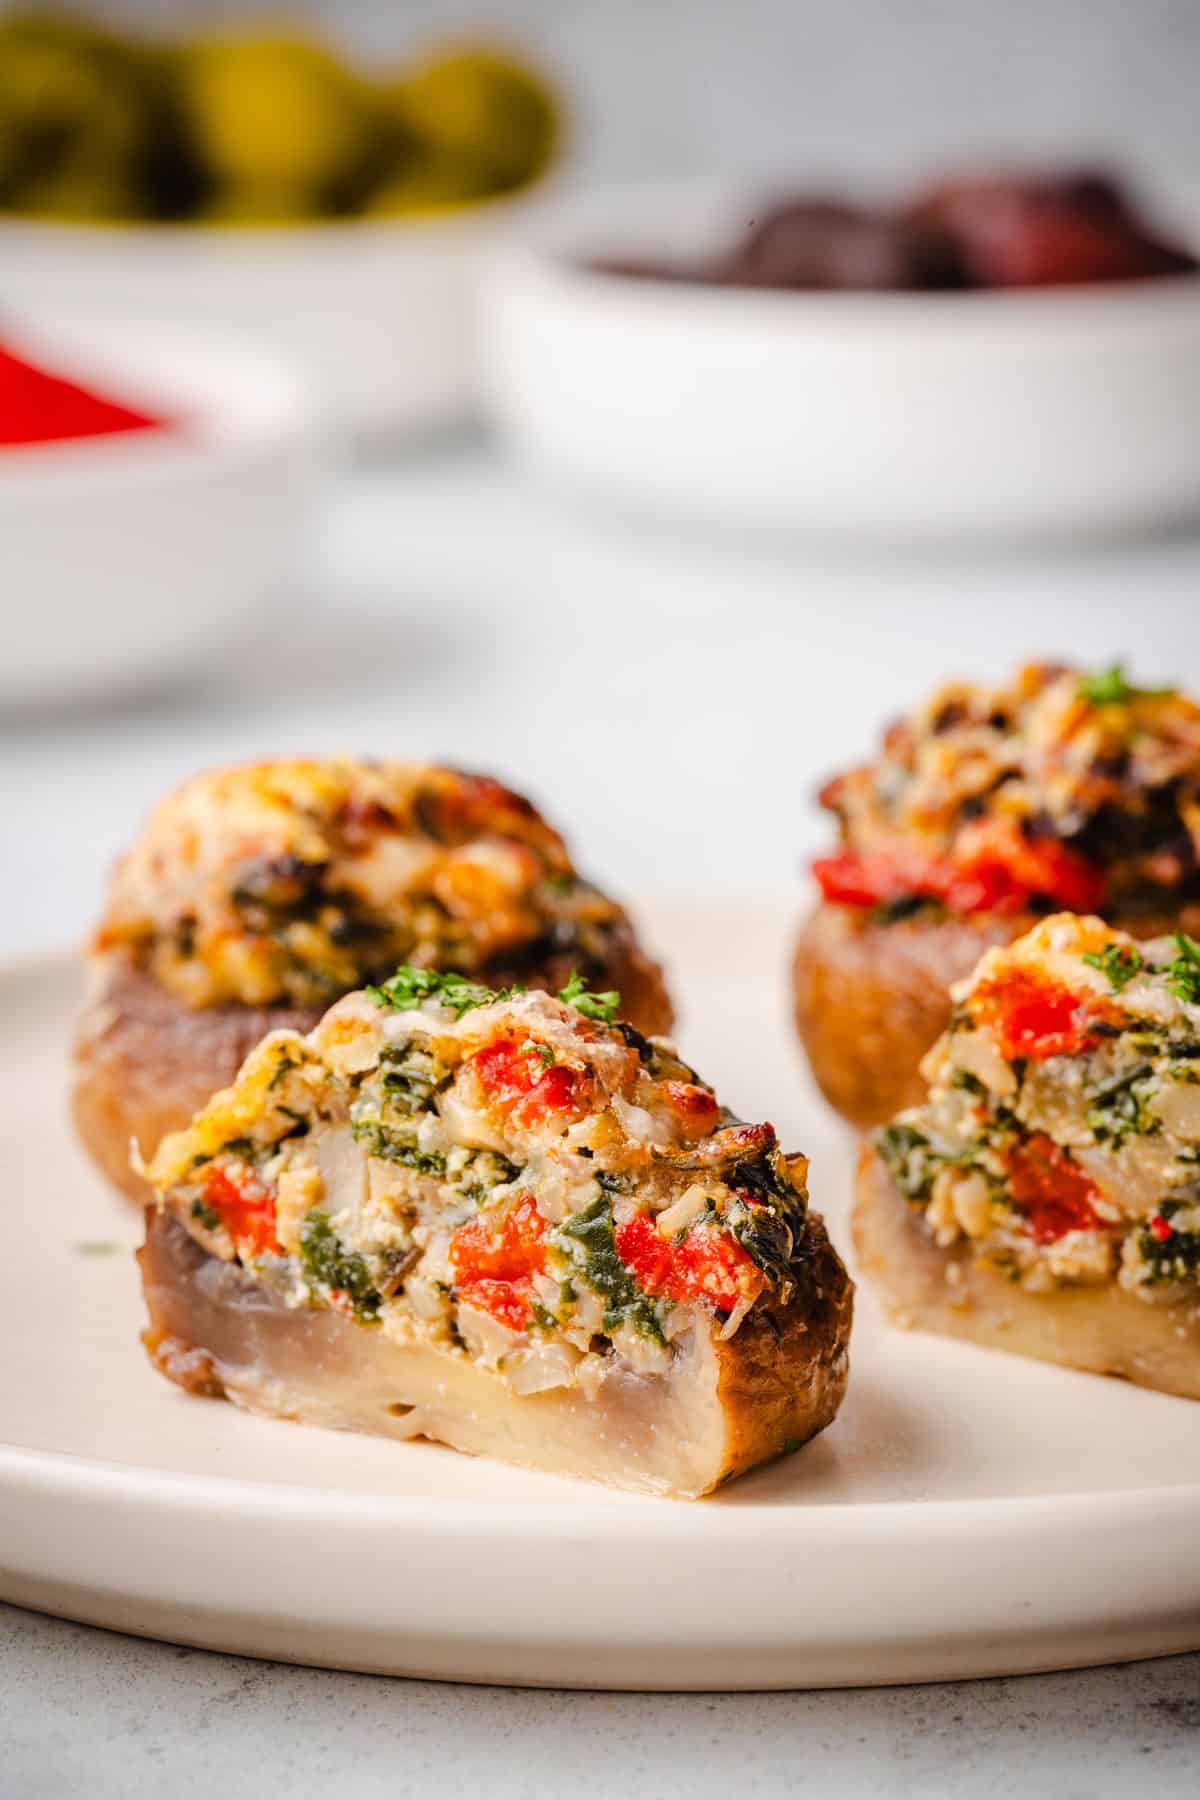 a close up of a stuffed mushroom cut in half in front of two whole stuffed mushrooms on a plate.